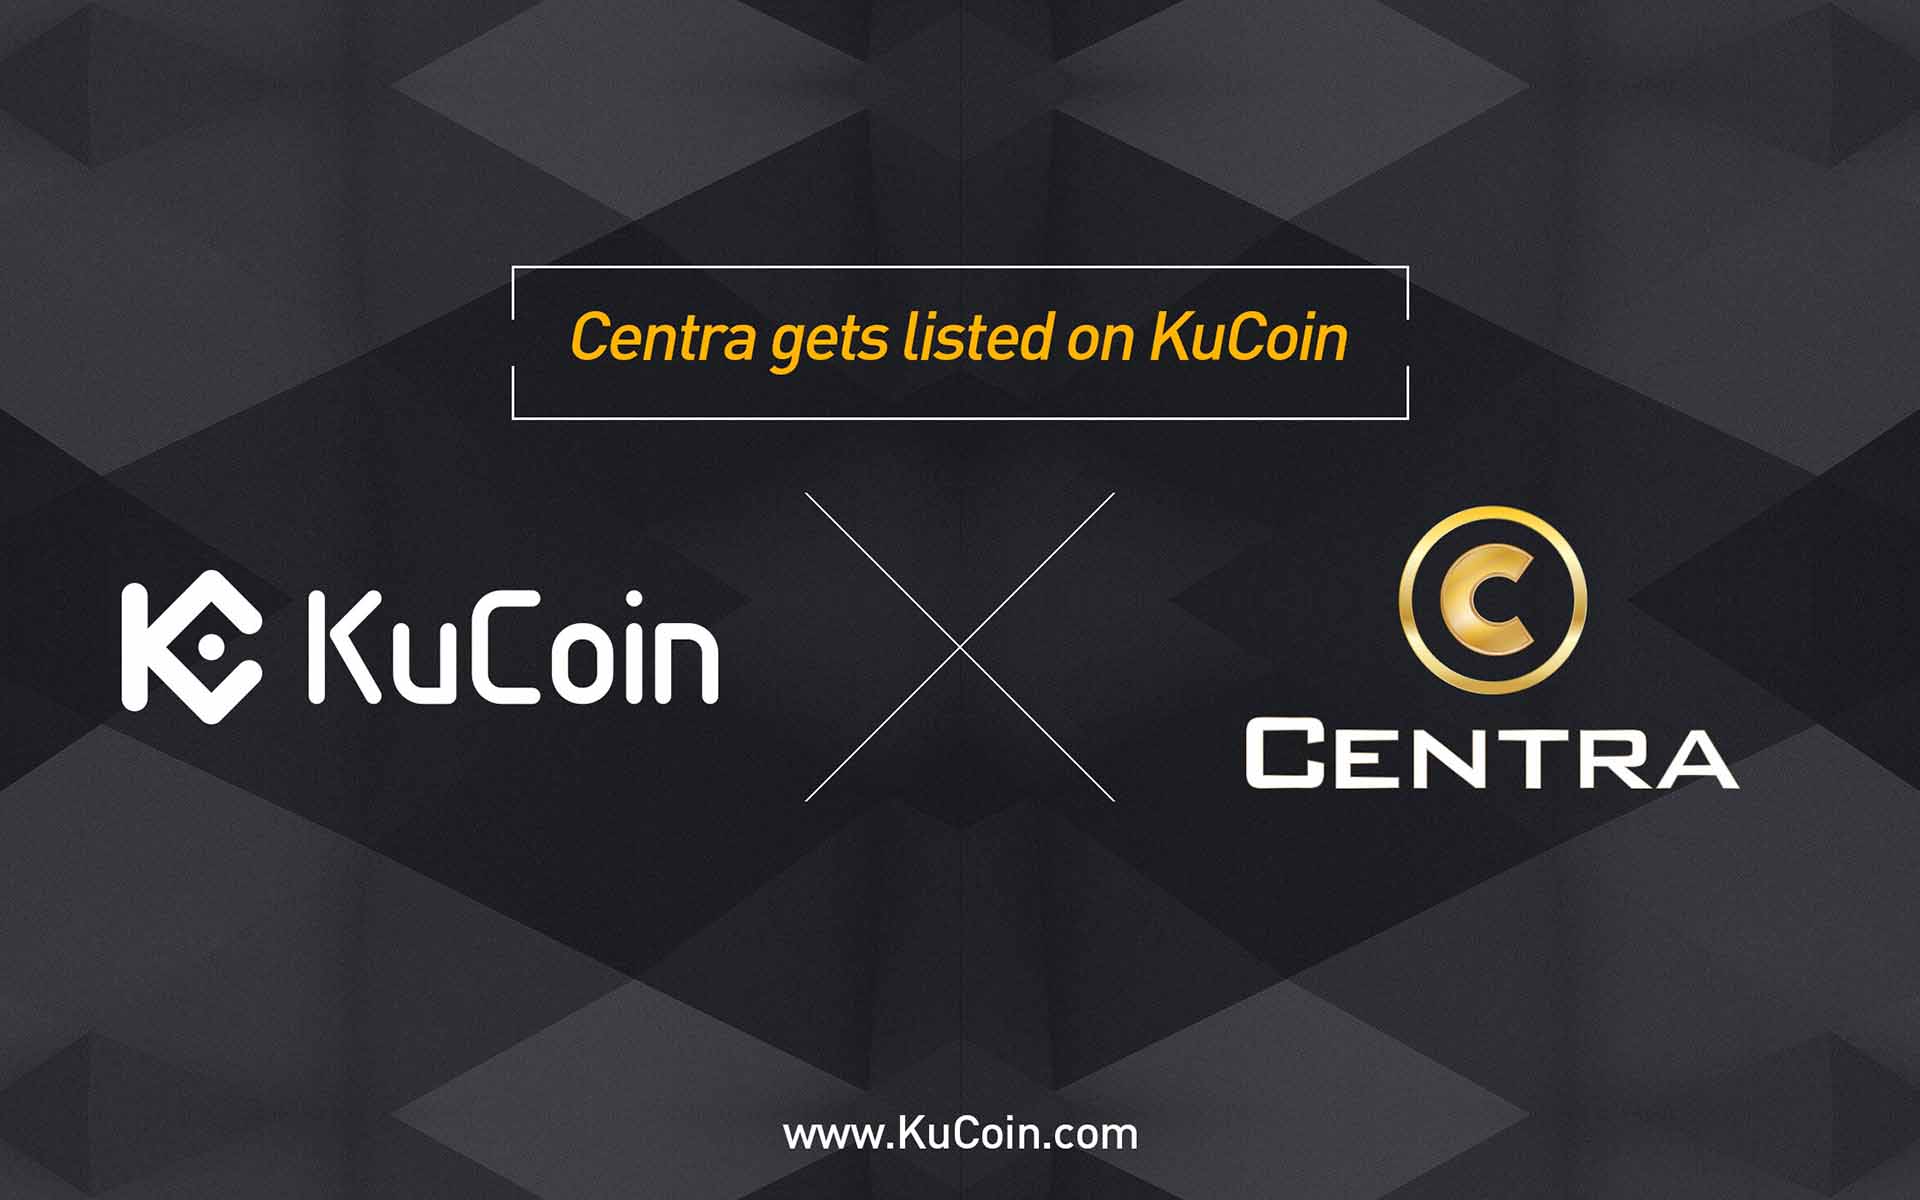 Centra Gets Listed On KuCoin